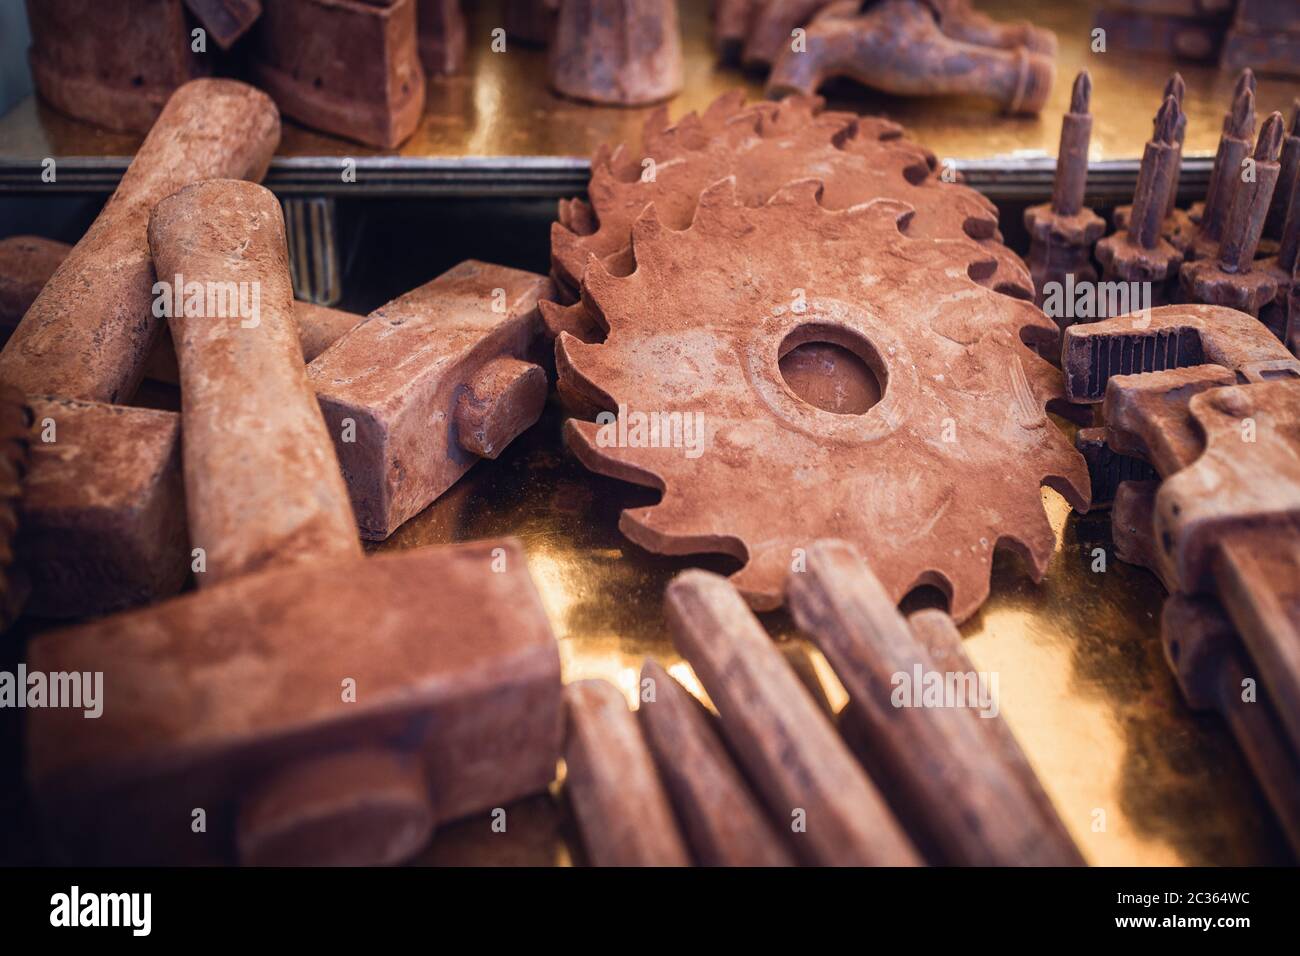 https://c8.alamy.com/comp/2C364WC/fake-tools-like-hammer-screwdriver-and-circular-saw-blade-made-with-chocolate-on-the-market-stall-of-an-italian-chocolate-event-in-piedmont-2C364WC.jpg